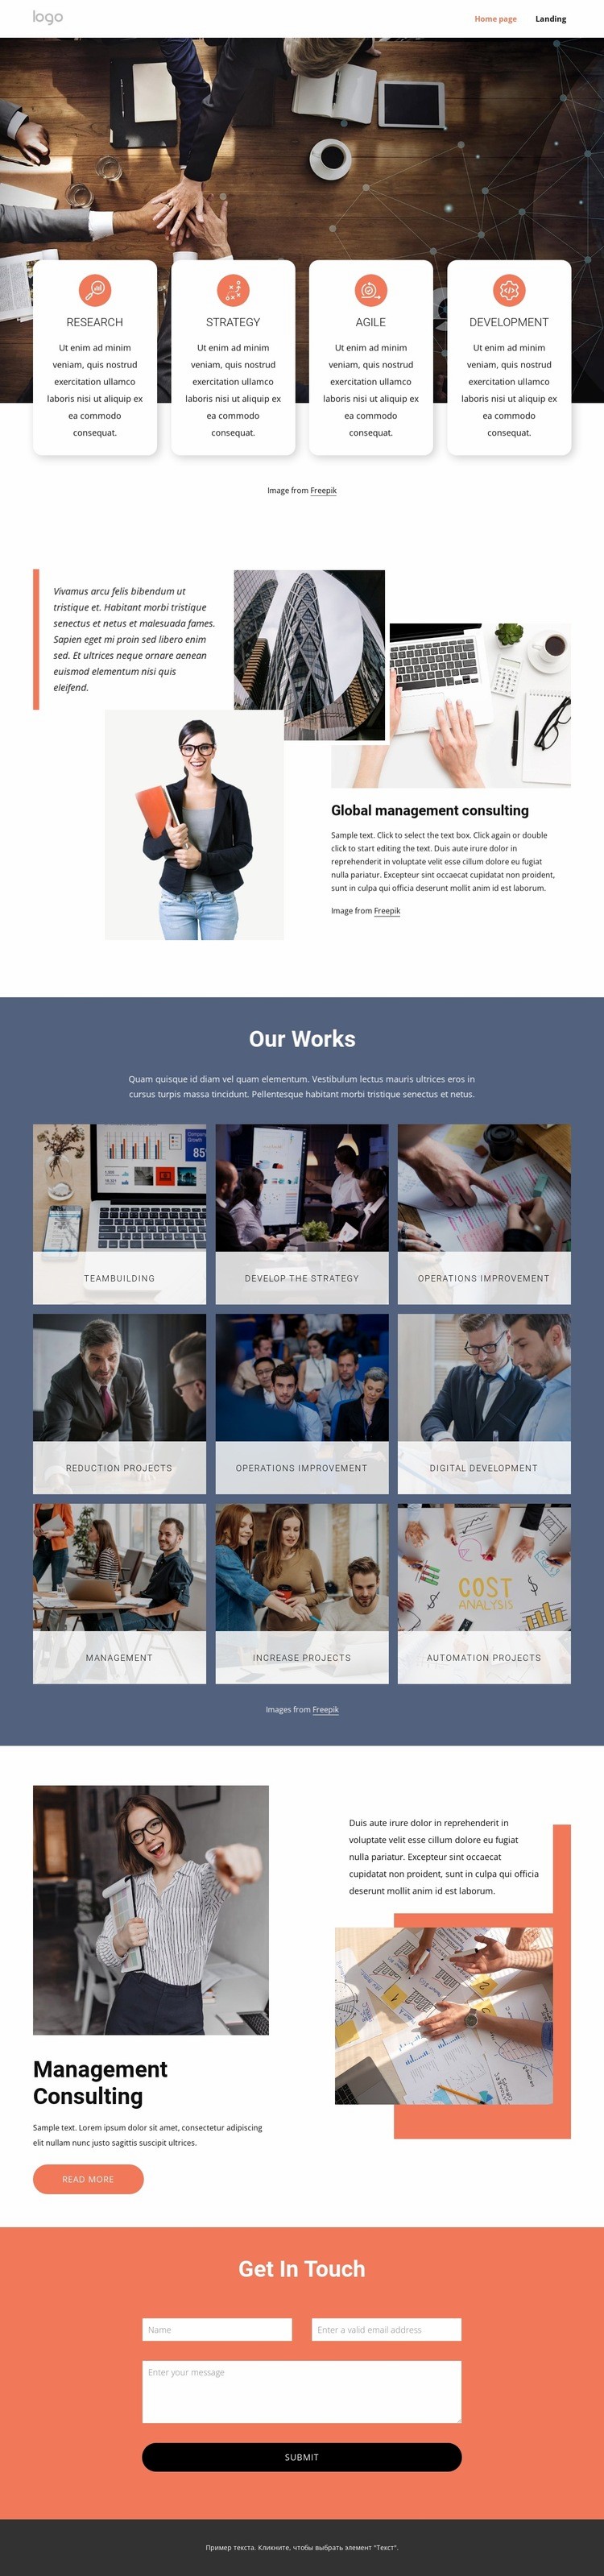 The leading consulting firms for management services Wix Template Alternative